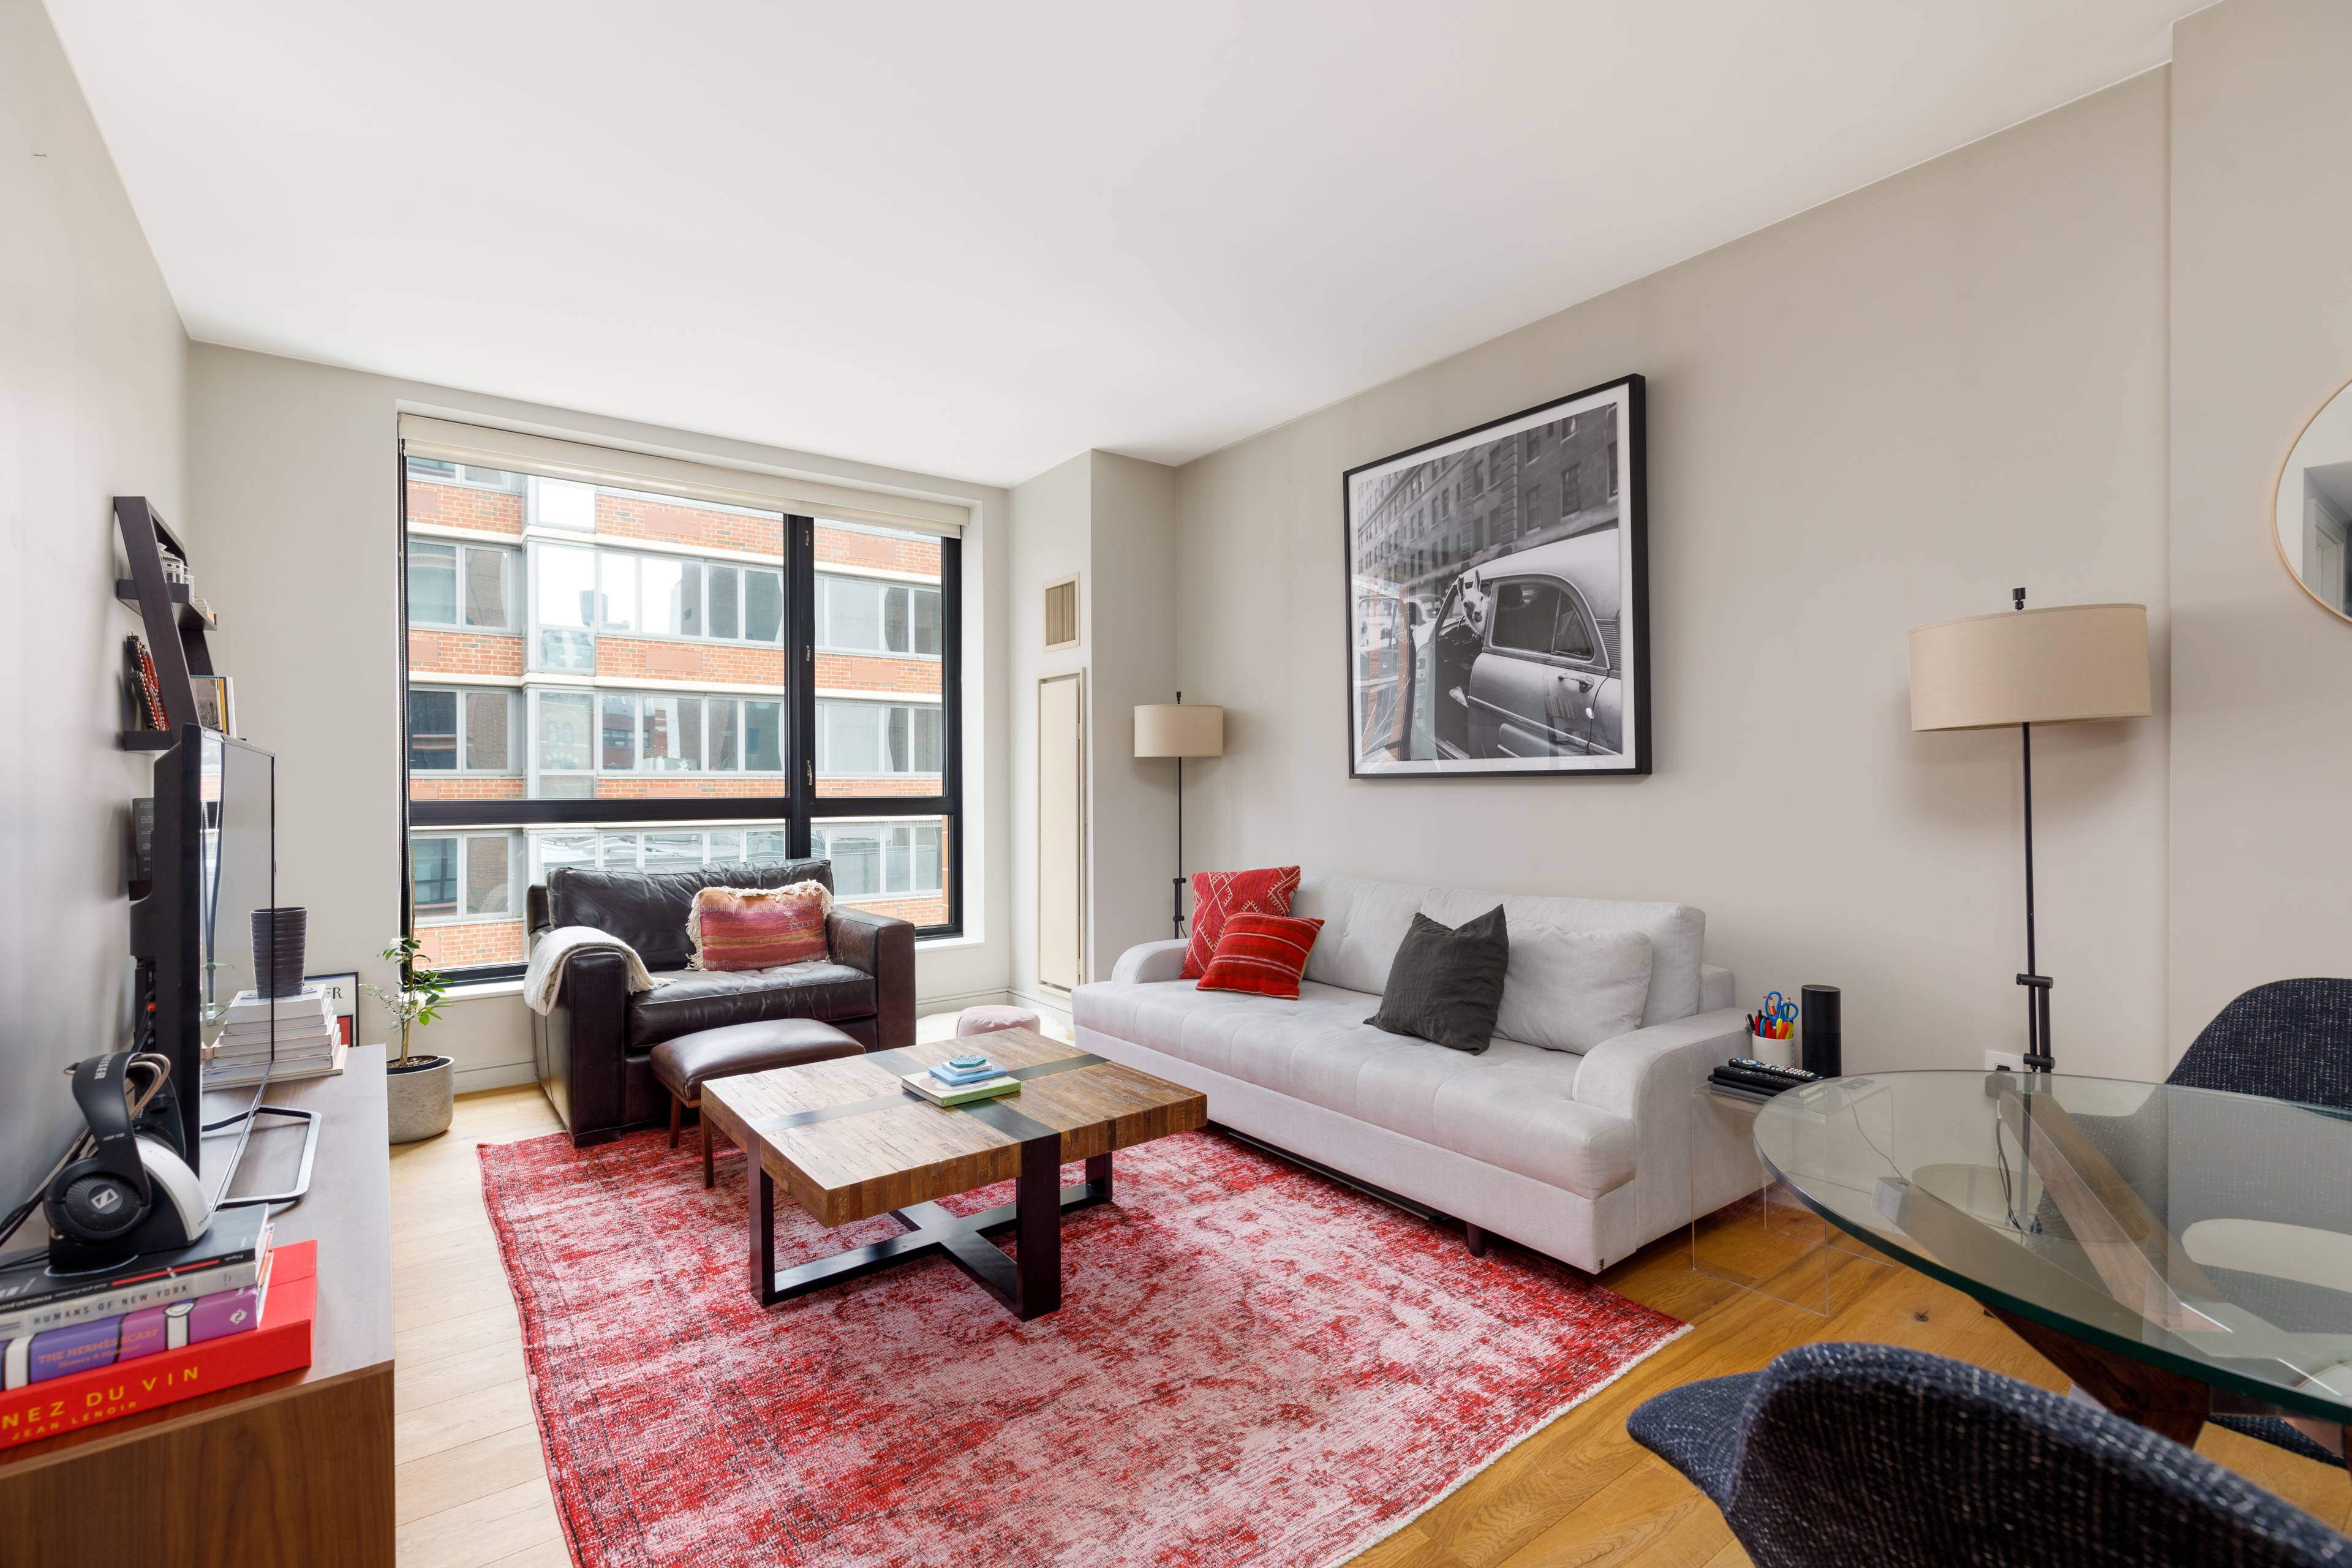 Welcome to residence 5E at the luxurious Art condominium in Manhattan's trendy West Chelsea, this sleek one bedroom home has been immaculately maintained and is in mint condition.